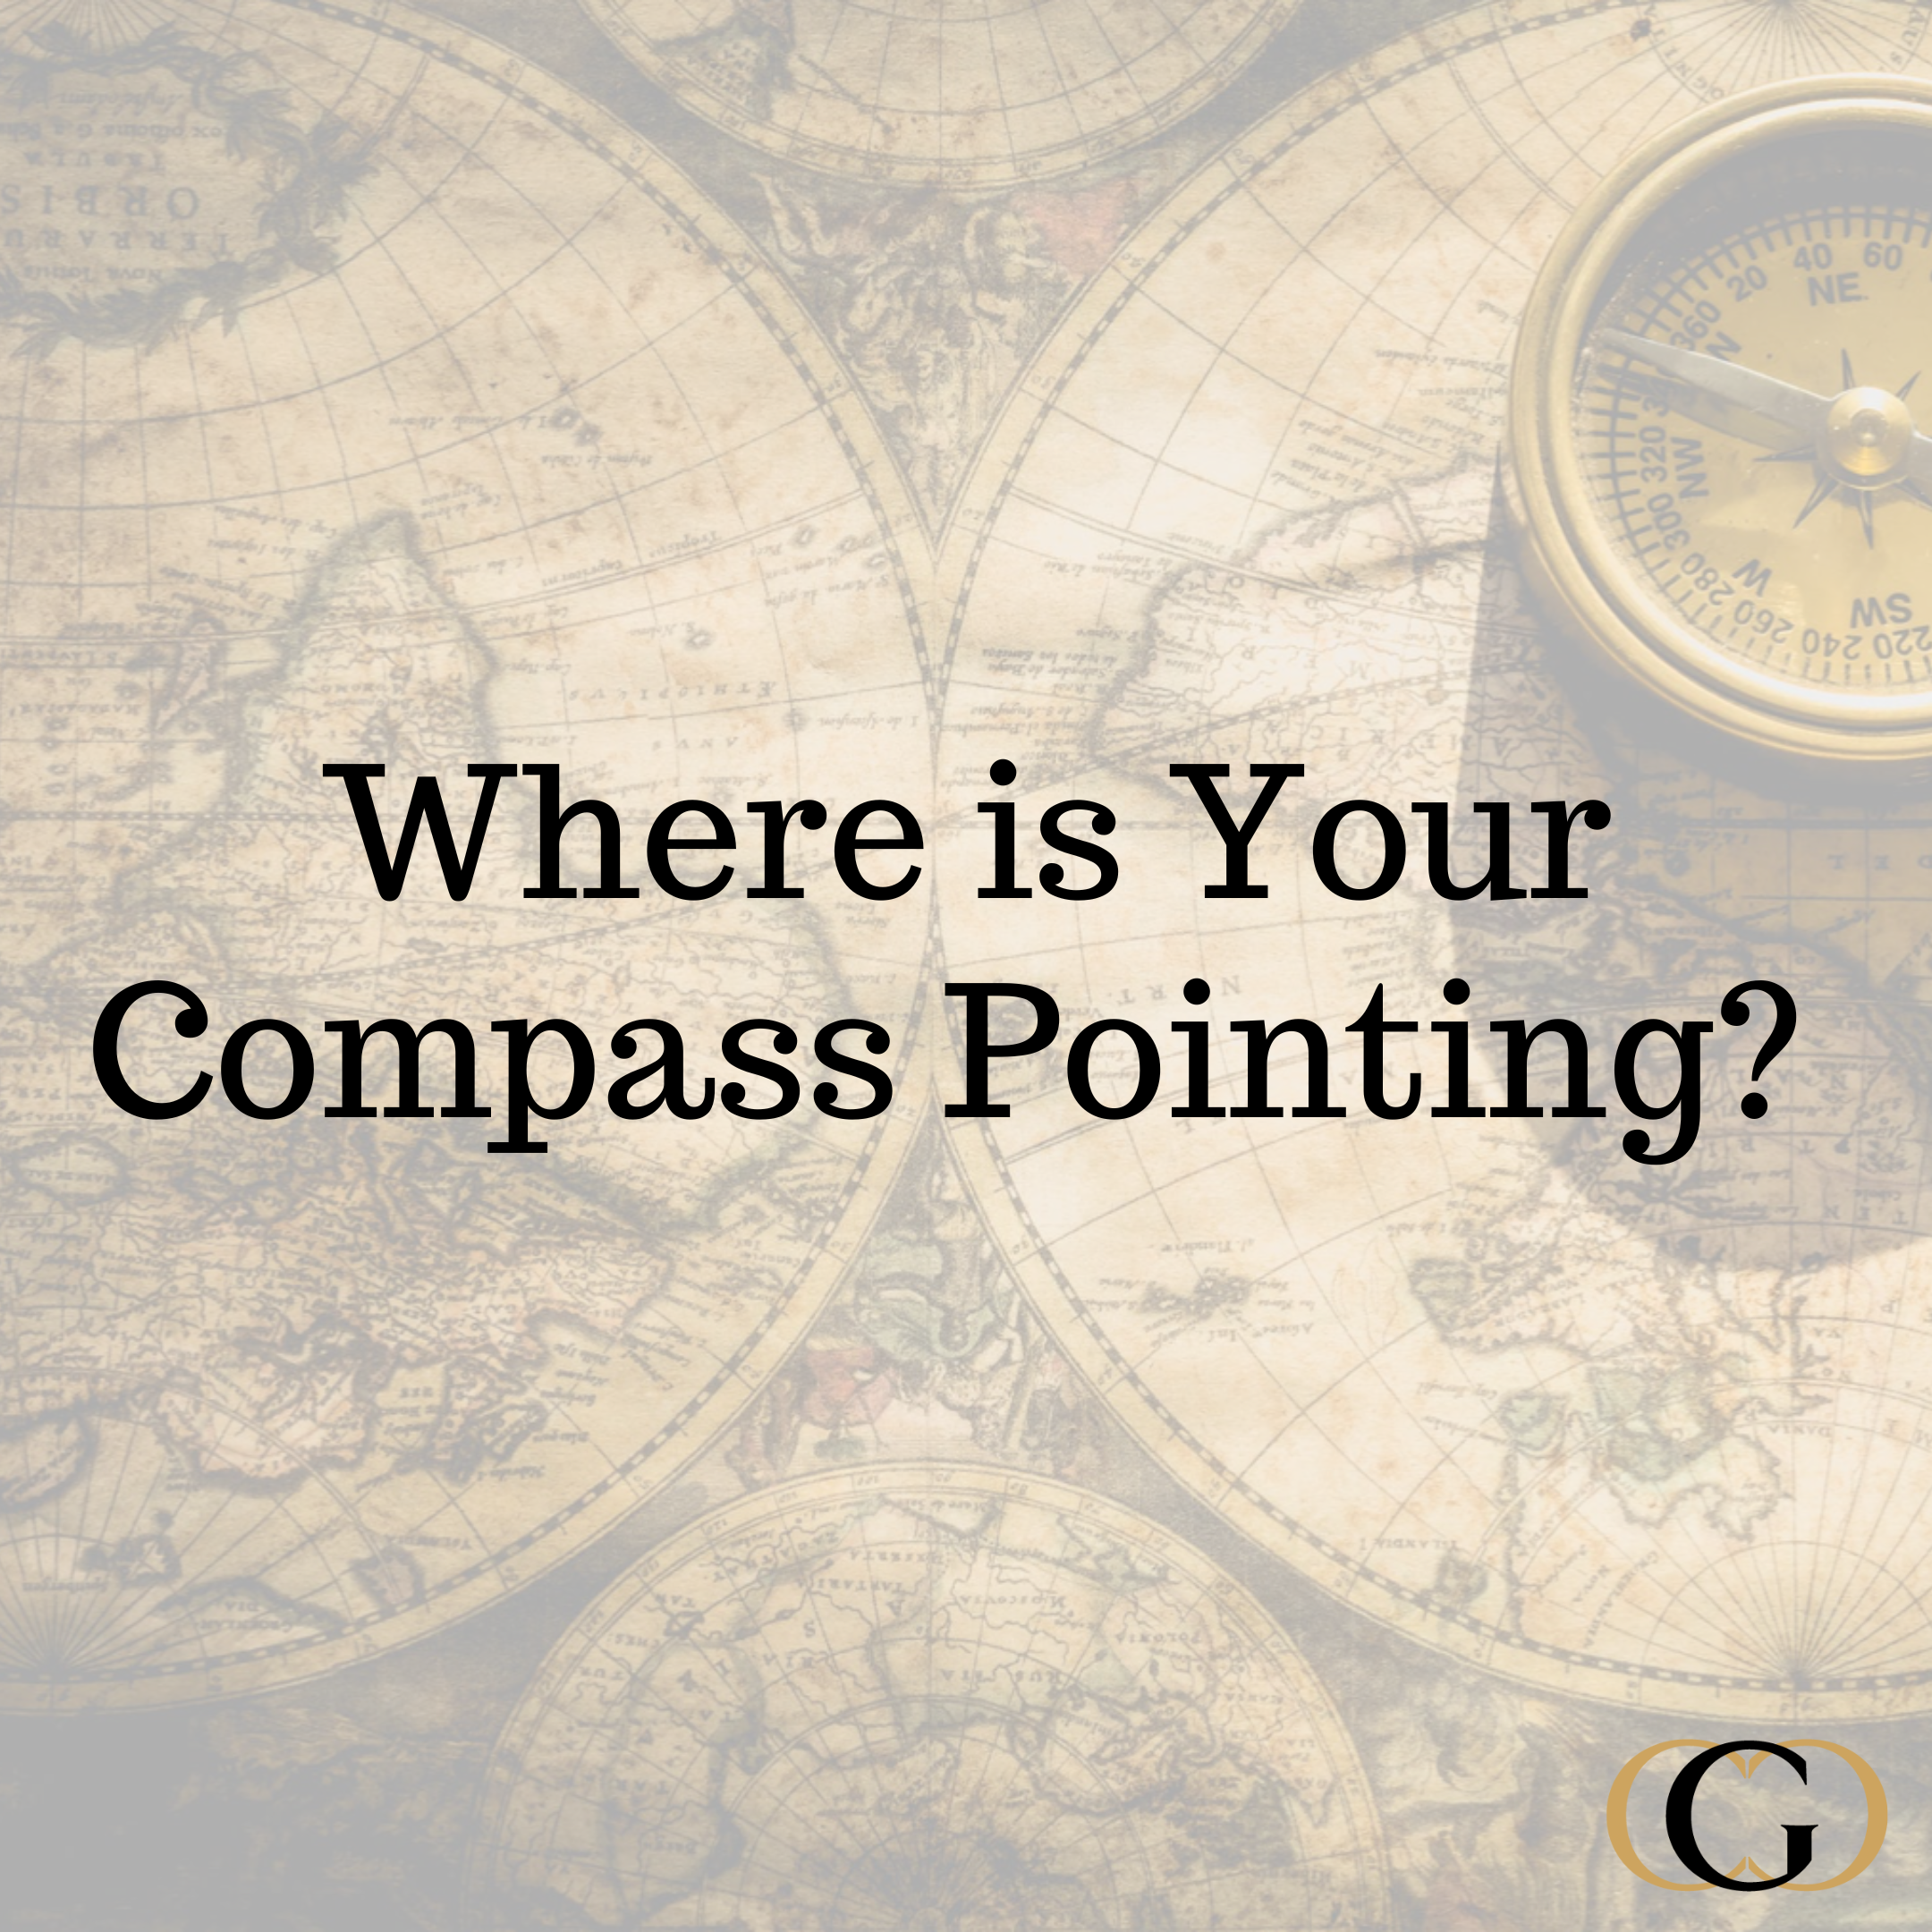 Where is your compass pointing?